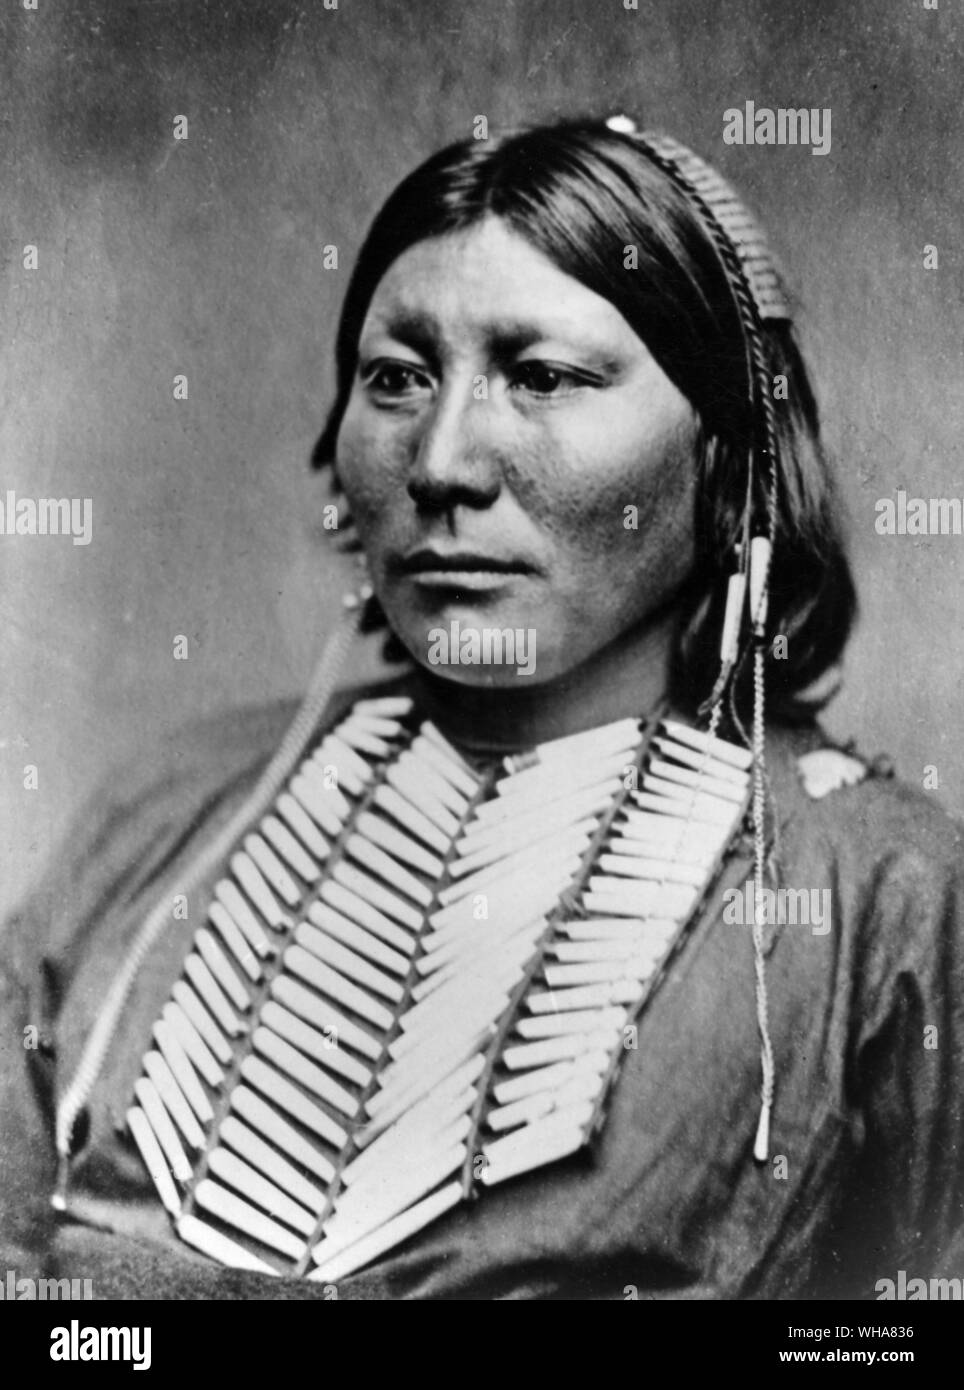 White Horse. Kiowa chief. Noted chief and raider 1870. WHITE HORSE (?-1892). White Horse (Tsen-tainte), a Kiowa chief during the second half of the nineteenth century, was noted among the tribe for his daring. Even in his teens he showed remarkable adeptness as an apprentice warrior. Due to his unusual strength, he became an outstanding horseman, able to snatch up a child while at a gallop. In the summer of 1867 White Horse joined a large party of Comanches and Kiowas on a revenge raid against the Navajos, who were then living in exile on the reservation near Fort Sumner, New Mexico. On the Stock Photo